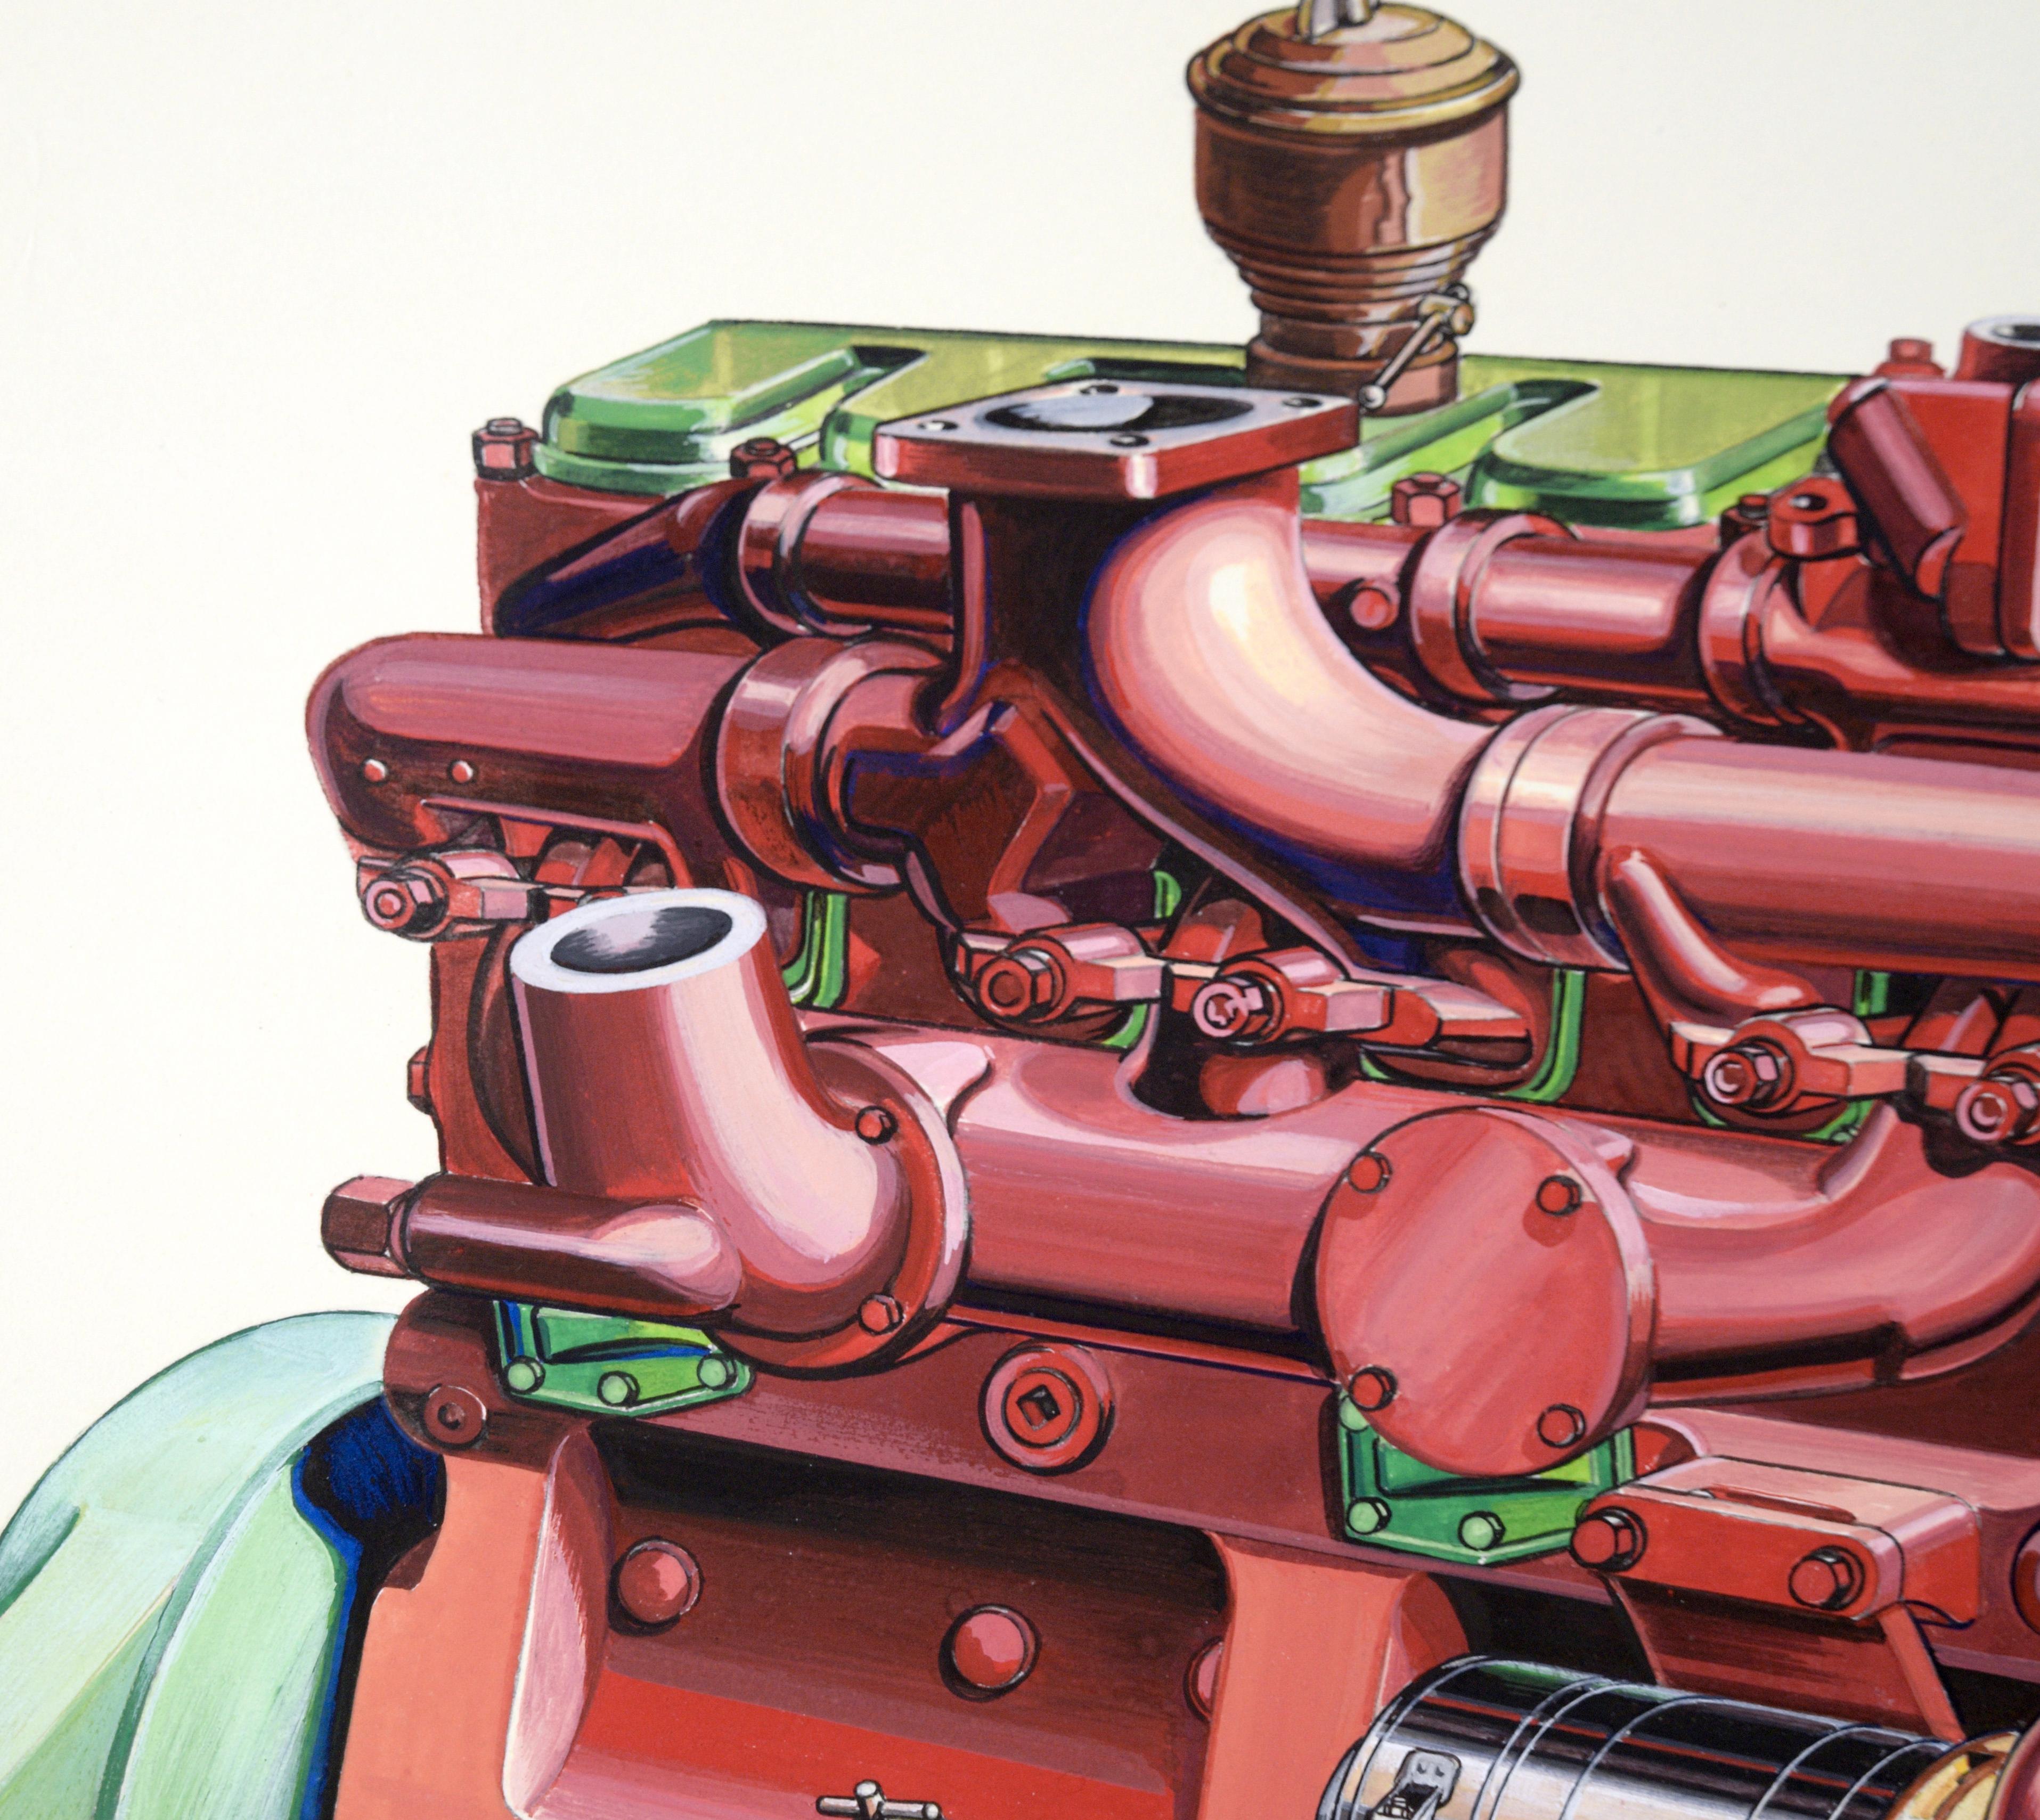 Technical Illustration of a Ford Lehman Diesel Engine in Gouache on Heavy Cardstock

Highly detailed and precise illustration of an engine by Joseph Yeager (American, 20th Century). The engine is bright red with some green accents. It is rendered in